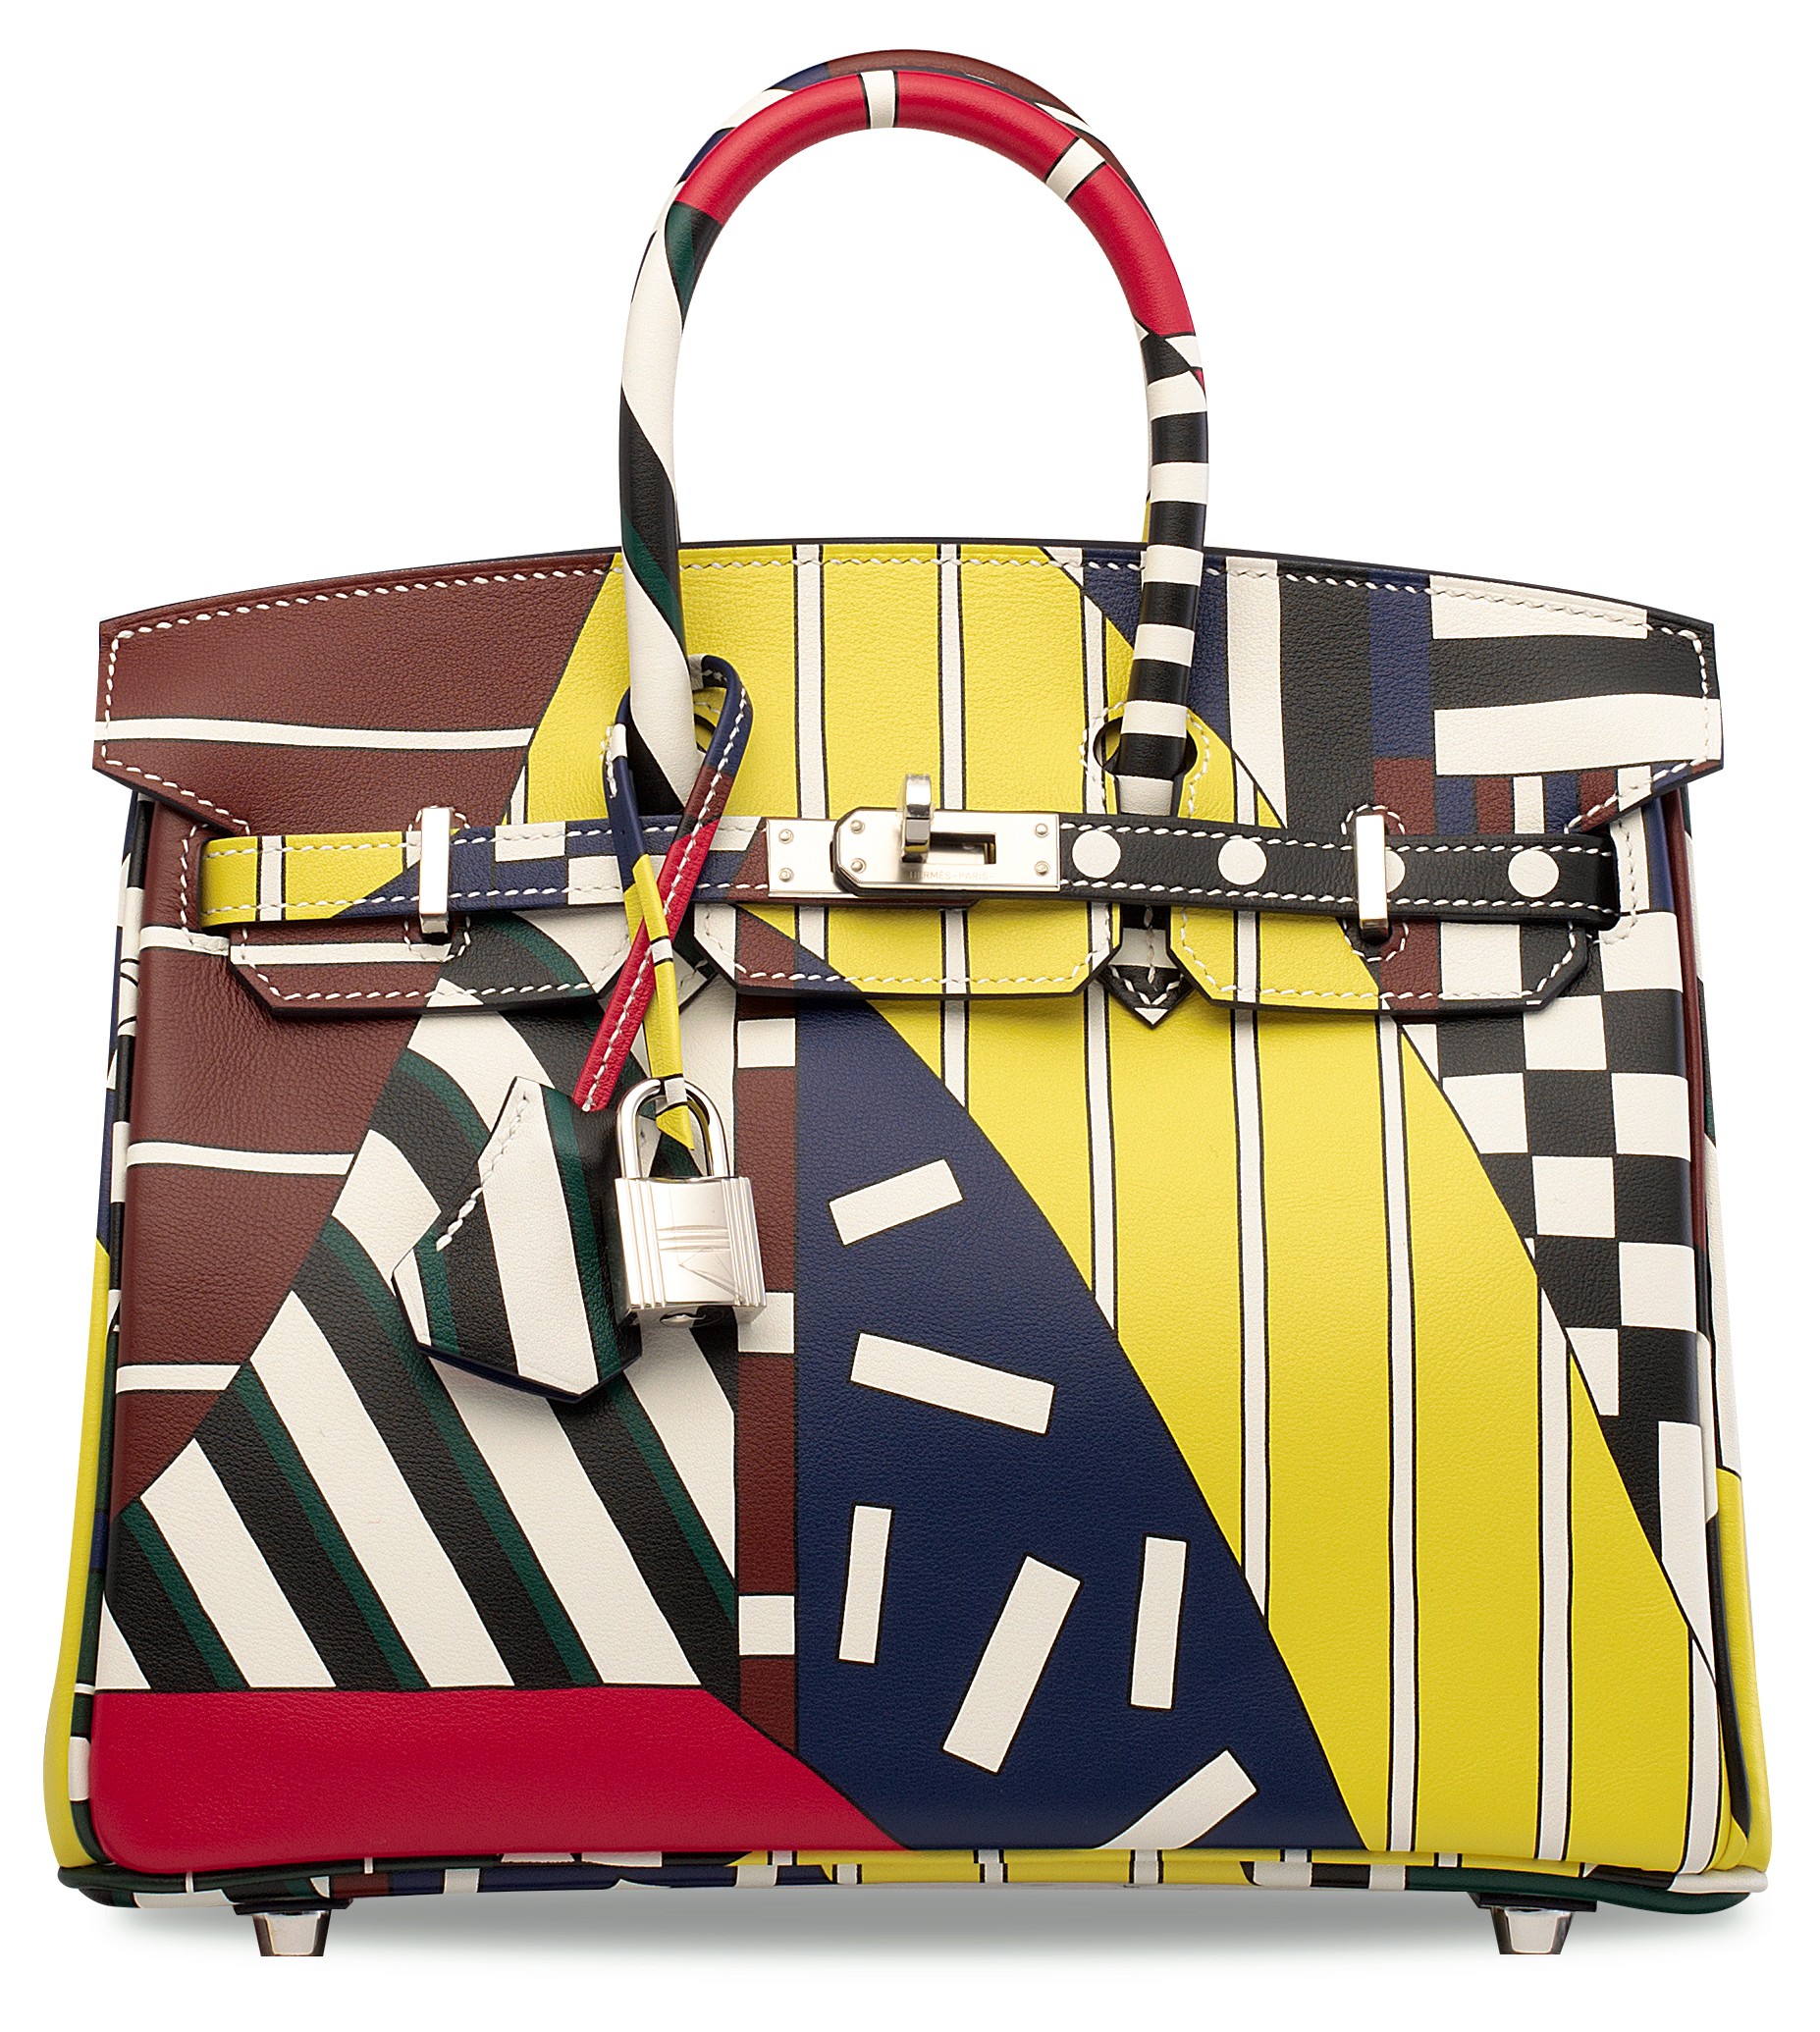 Christie’s to auction rare Hermès handbags in Hong Kong | Style ...